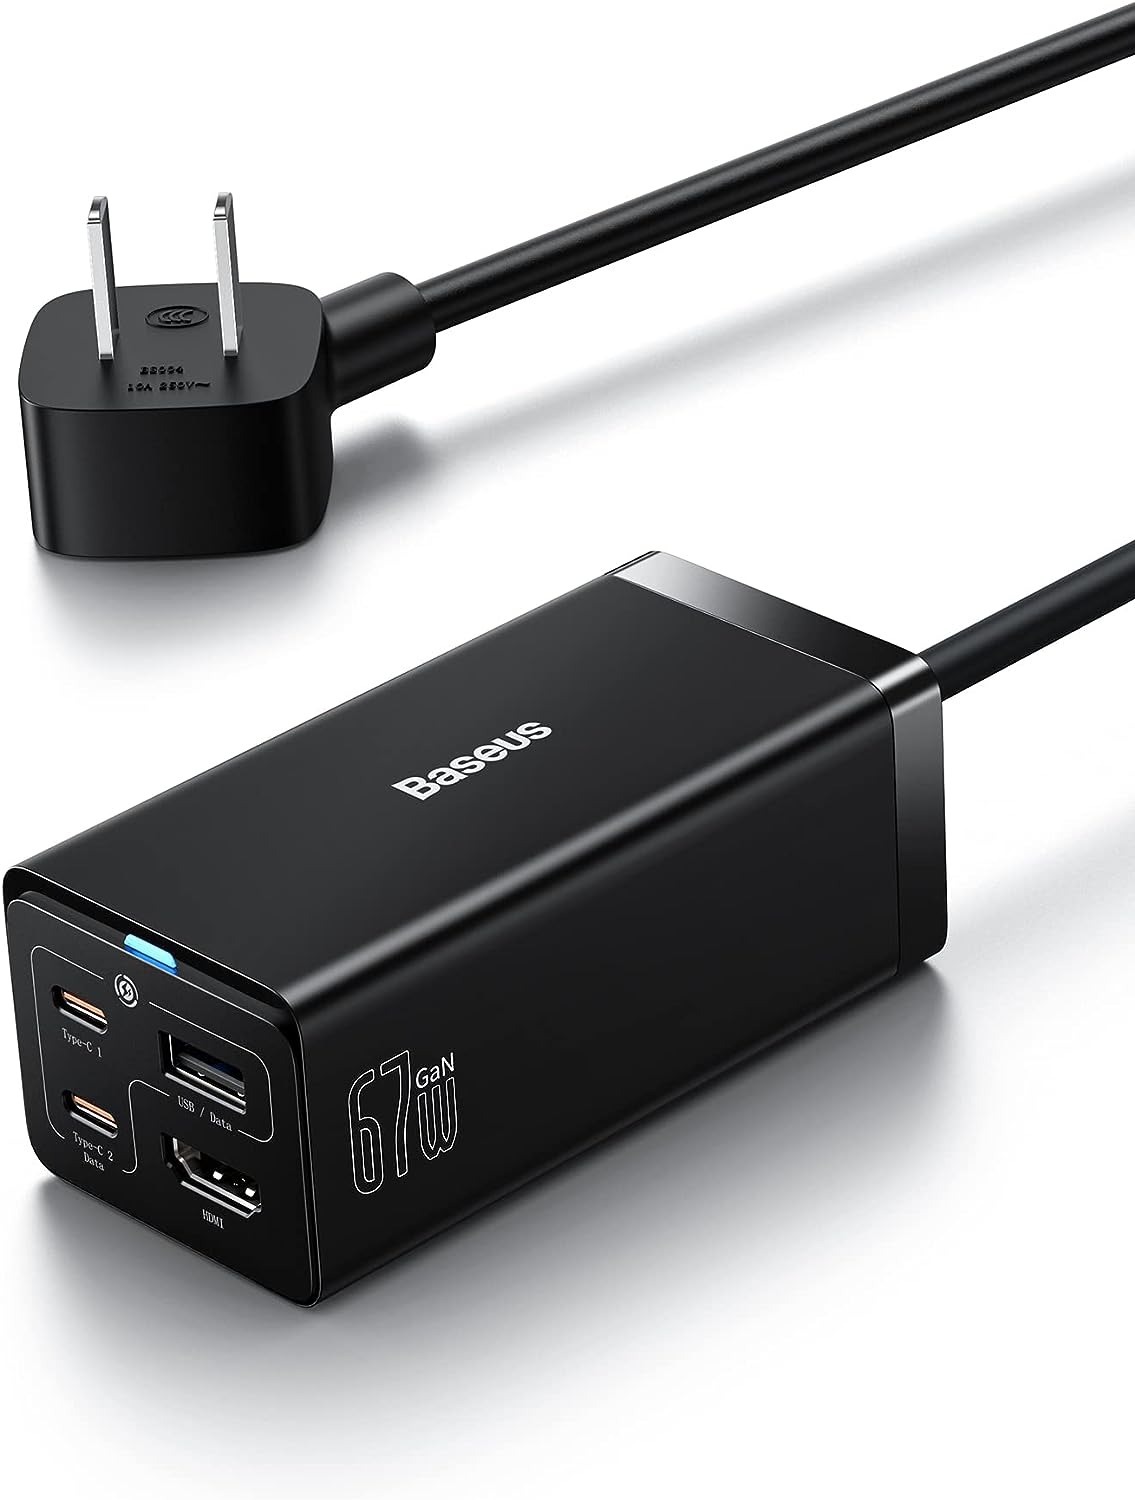 Chargeur USB C 30W/25W,Cshare USB C PD 3.0 PPS Rapide Chargeur